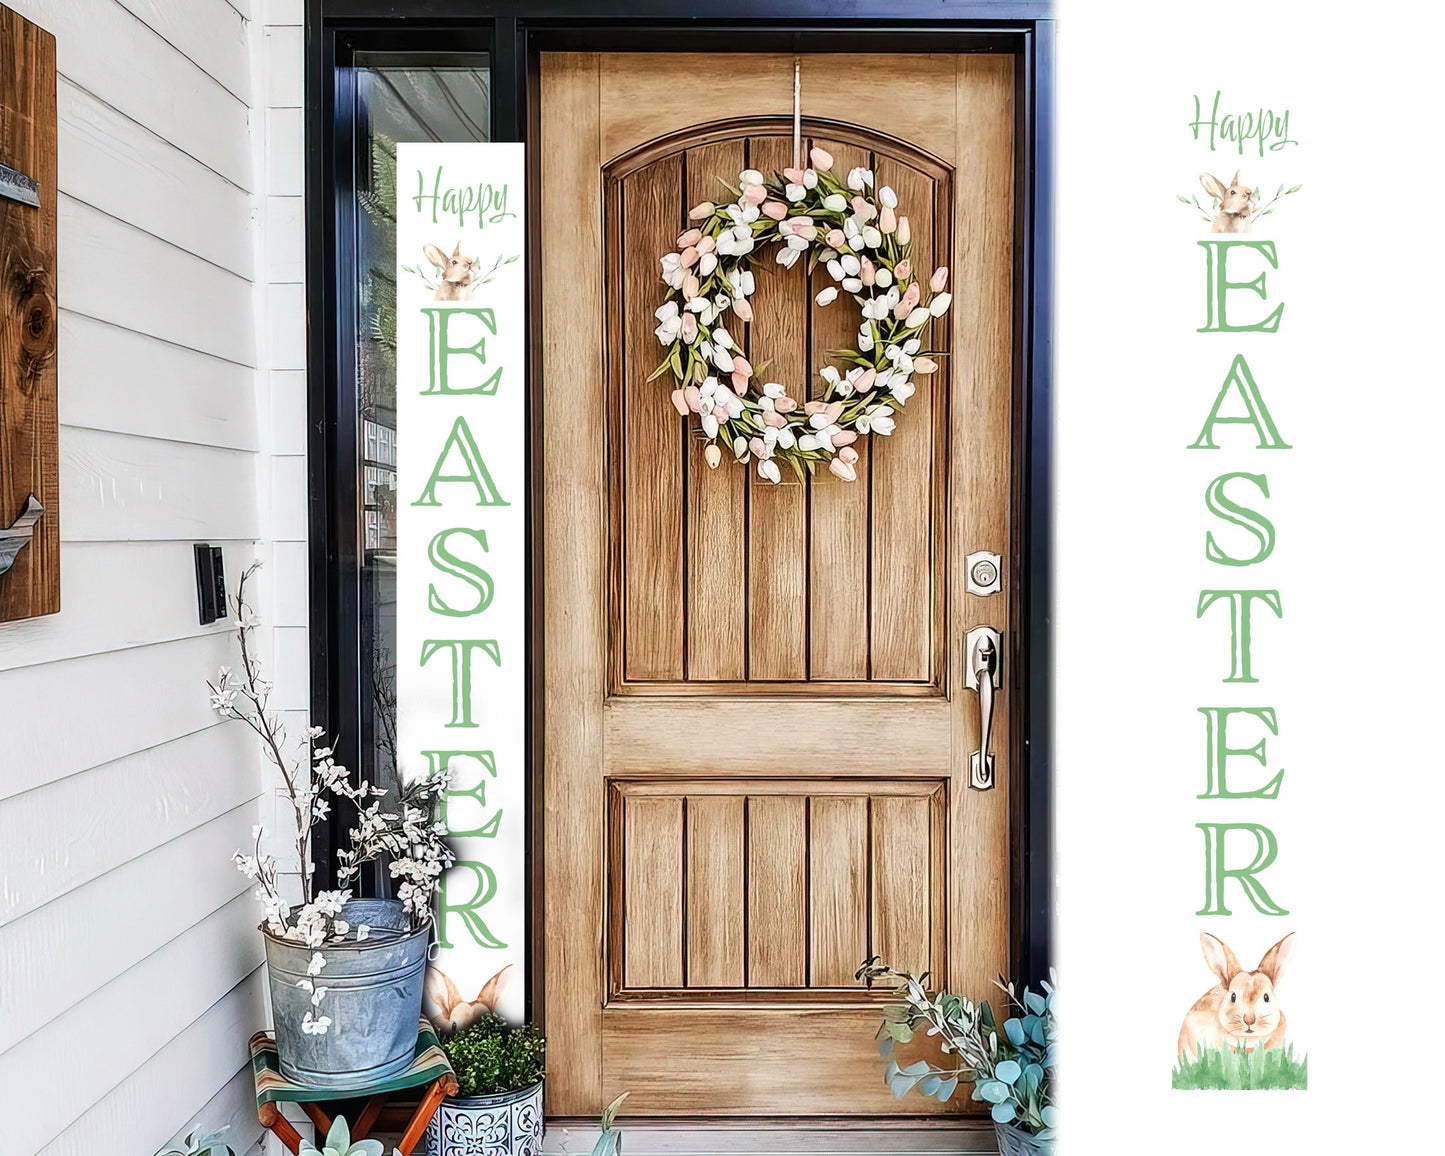 72in Happy Easter Porch Sign - Easter Decor Sign, Home Front Door Yard Party Decor, Folding Sign, Rustic Farmhouse Party Decor